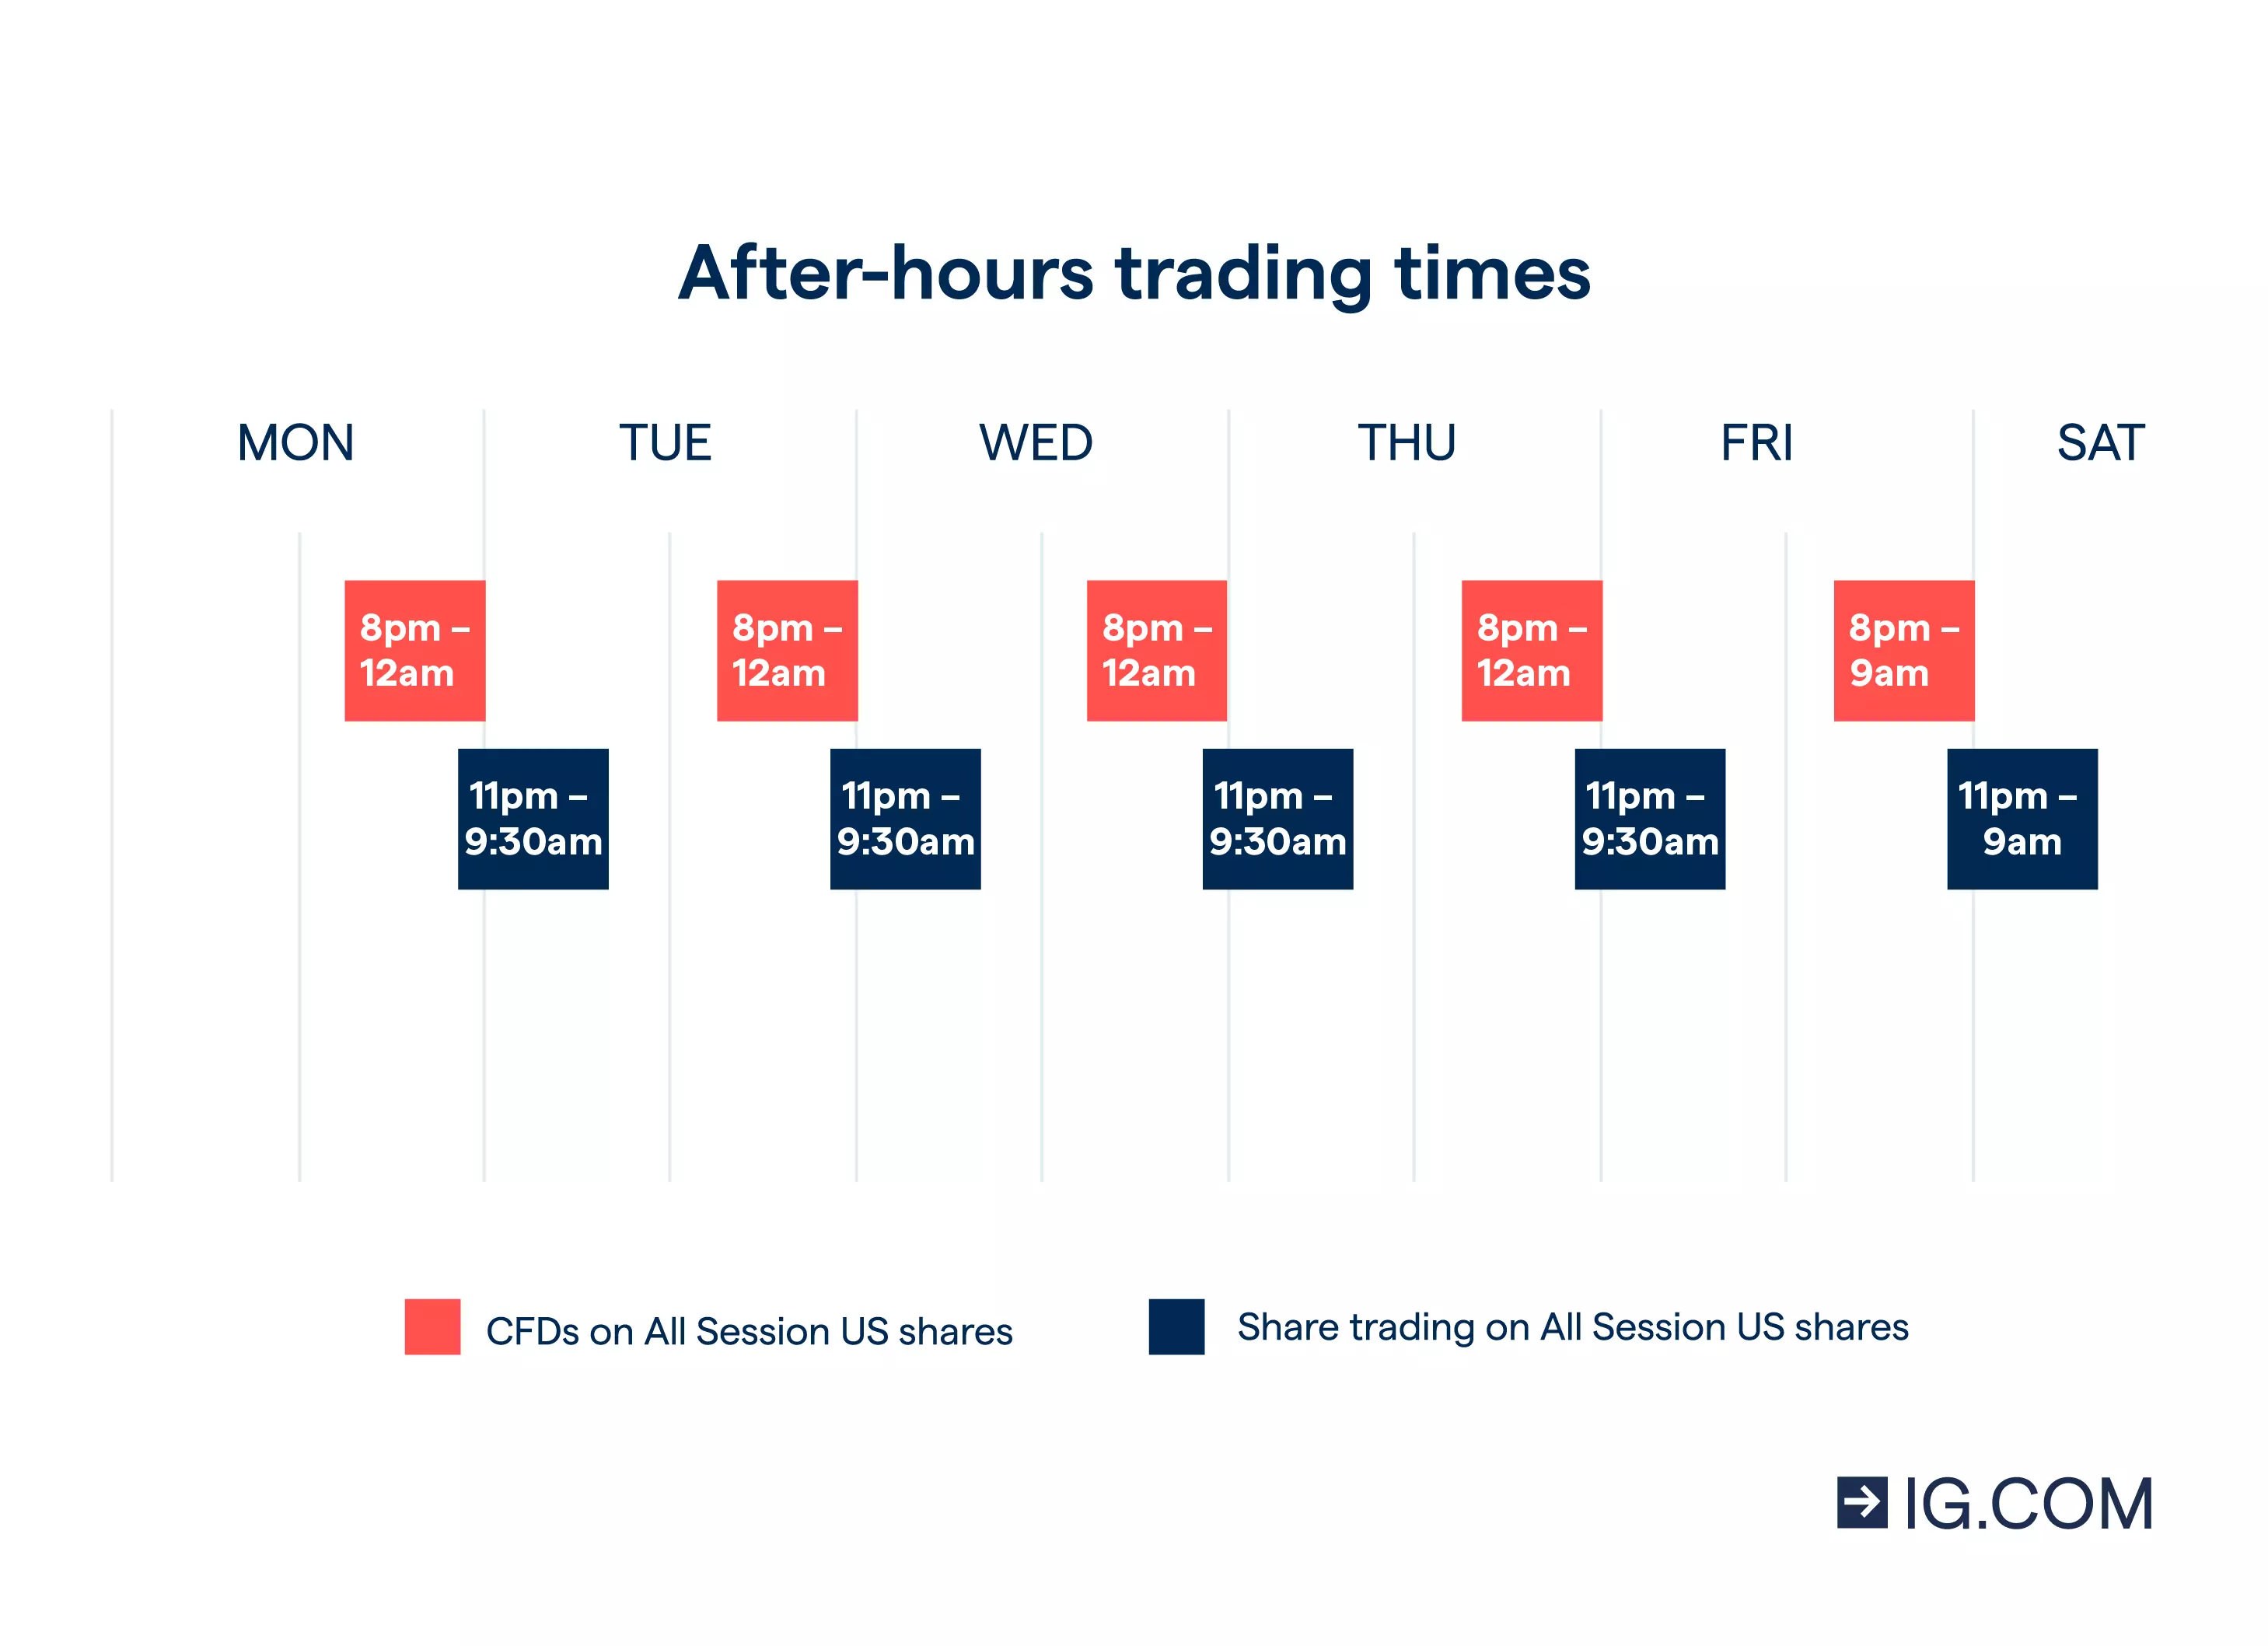 Out of hours shares